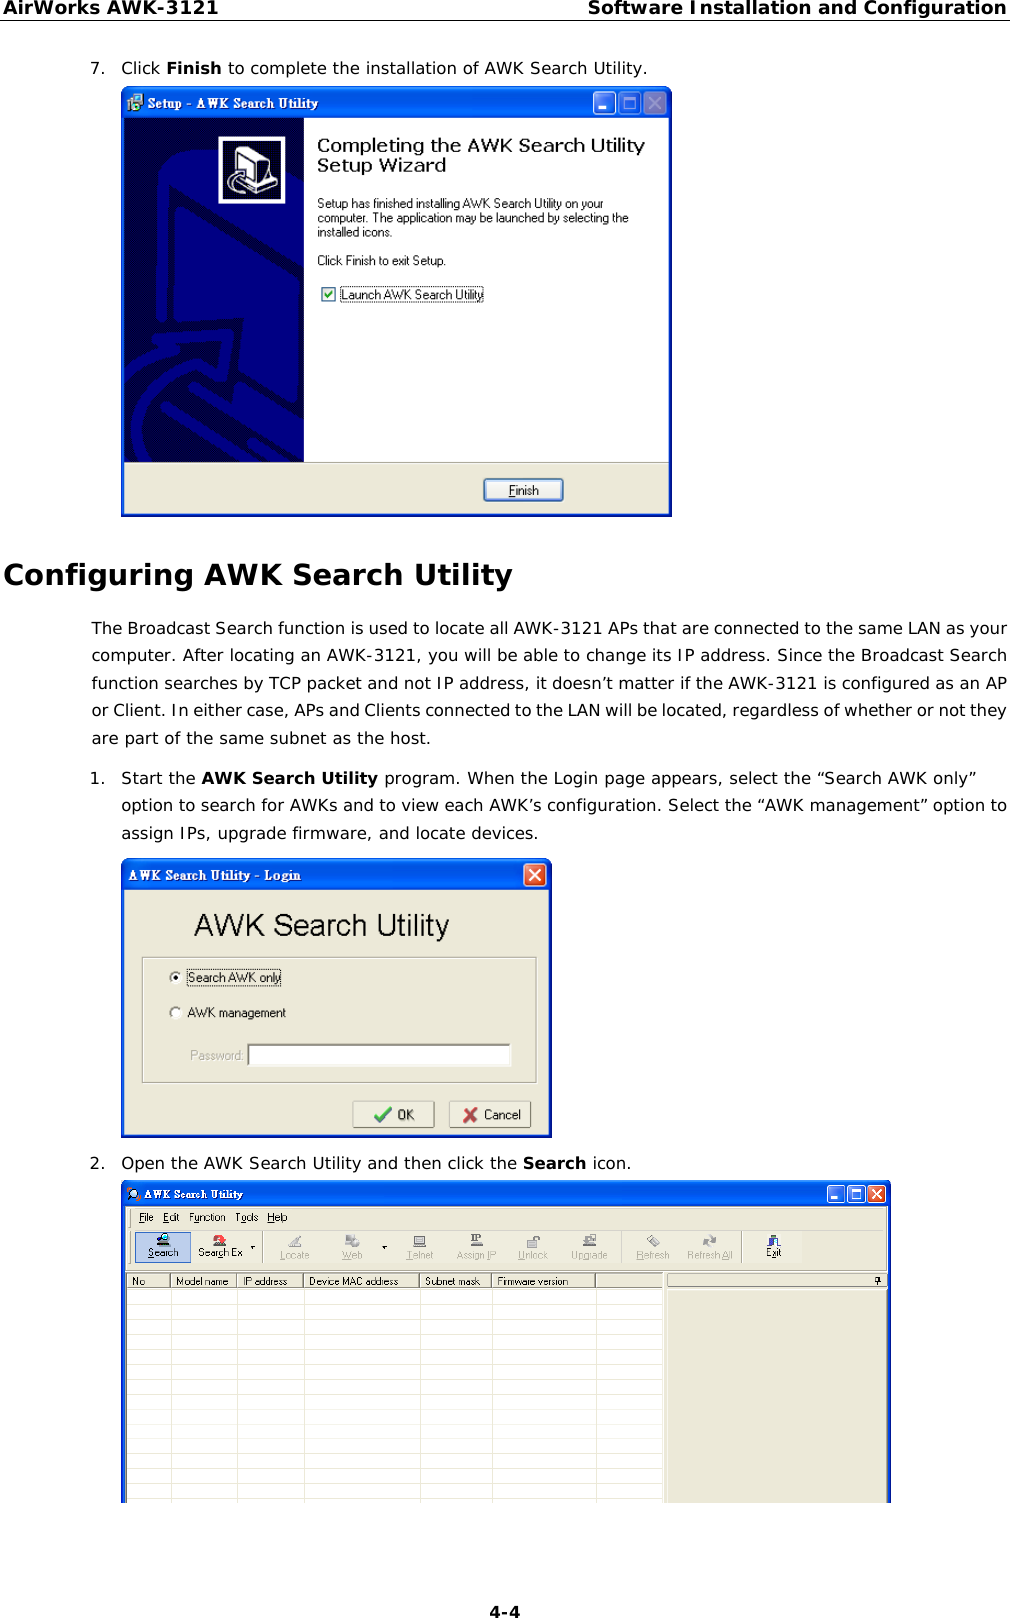 AirWorks AWK-3121  Software Installation and Configuration  4-47. Click Finish to complete the installation of AWK Search Utility.  Configuring AWK Search Utility The Broadcast Search function is used to locate all AWK-3121 APs that are connected to the same LAN as your computer. After locating an AWK-3121, you will be able to change its IP address. Since the Broadcast Search function searches by TCP packet and not IP address, it doesn’t matter if the AWK-3121 is configured as an AP or Client. In either case, APs and Clients connected to the LAN will be located, regardless of whether or not they are part of the same subnet as the host. 1. Start the AWK Search Utility program. When the Login page appears, select the “Search AWK only” option to search for AWKs and to view each AWK’s configuration. Select the “AWK management” option to assign IPs, upgrade firmware, and locate devices.  2. Open the AWK Search Utility and then click the Search icon.  